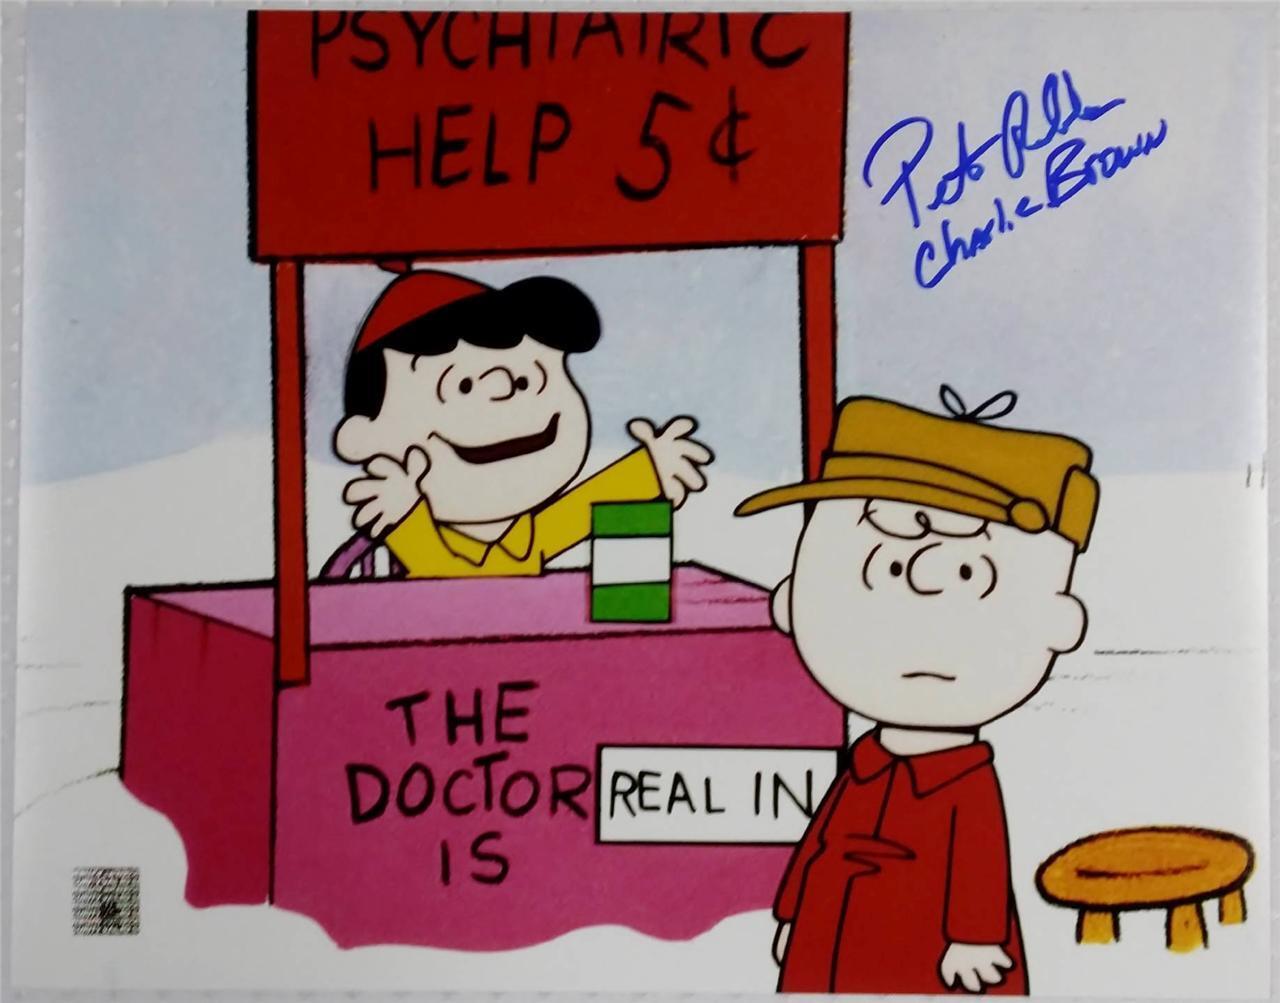 Peter Robbins Voice Of Charlie Brown Signed 11x14 Photo Poster painting w/ Official Hologram (D)